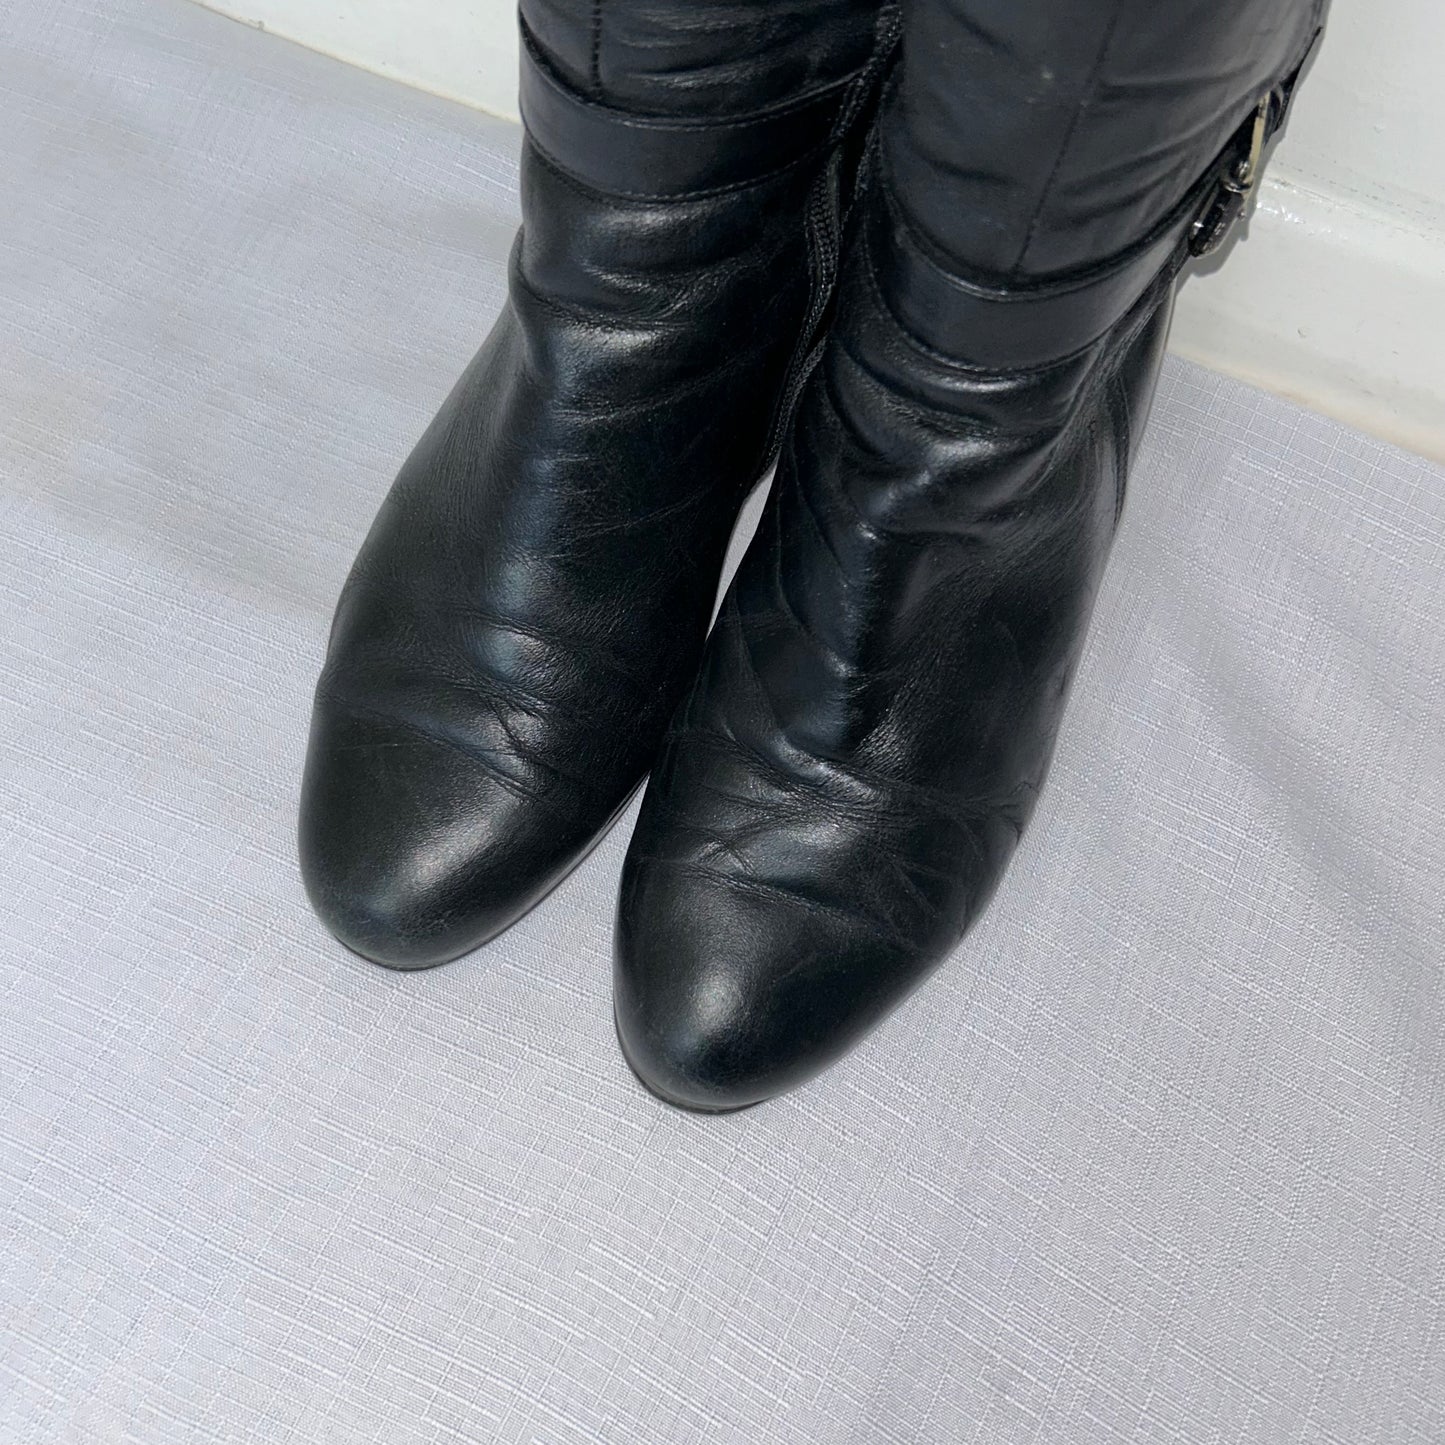 toes of black knee high silver buckle boots shown on a white background